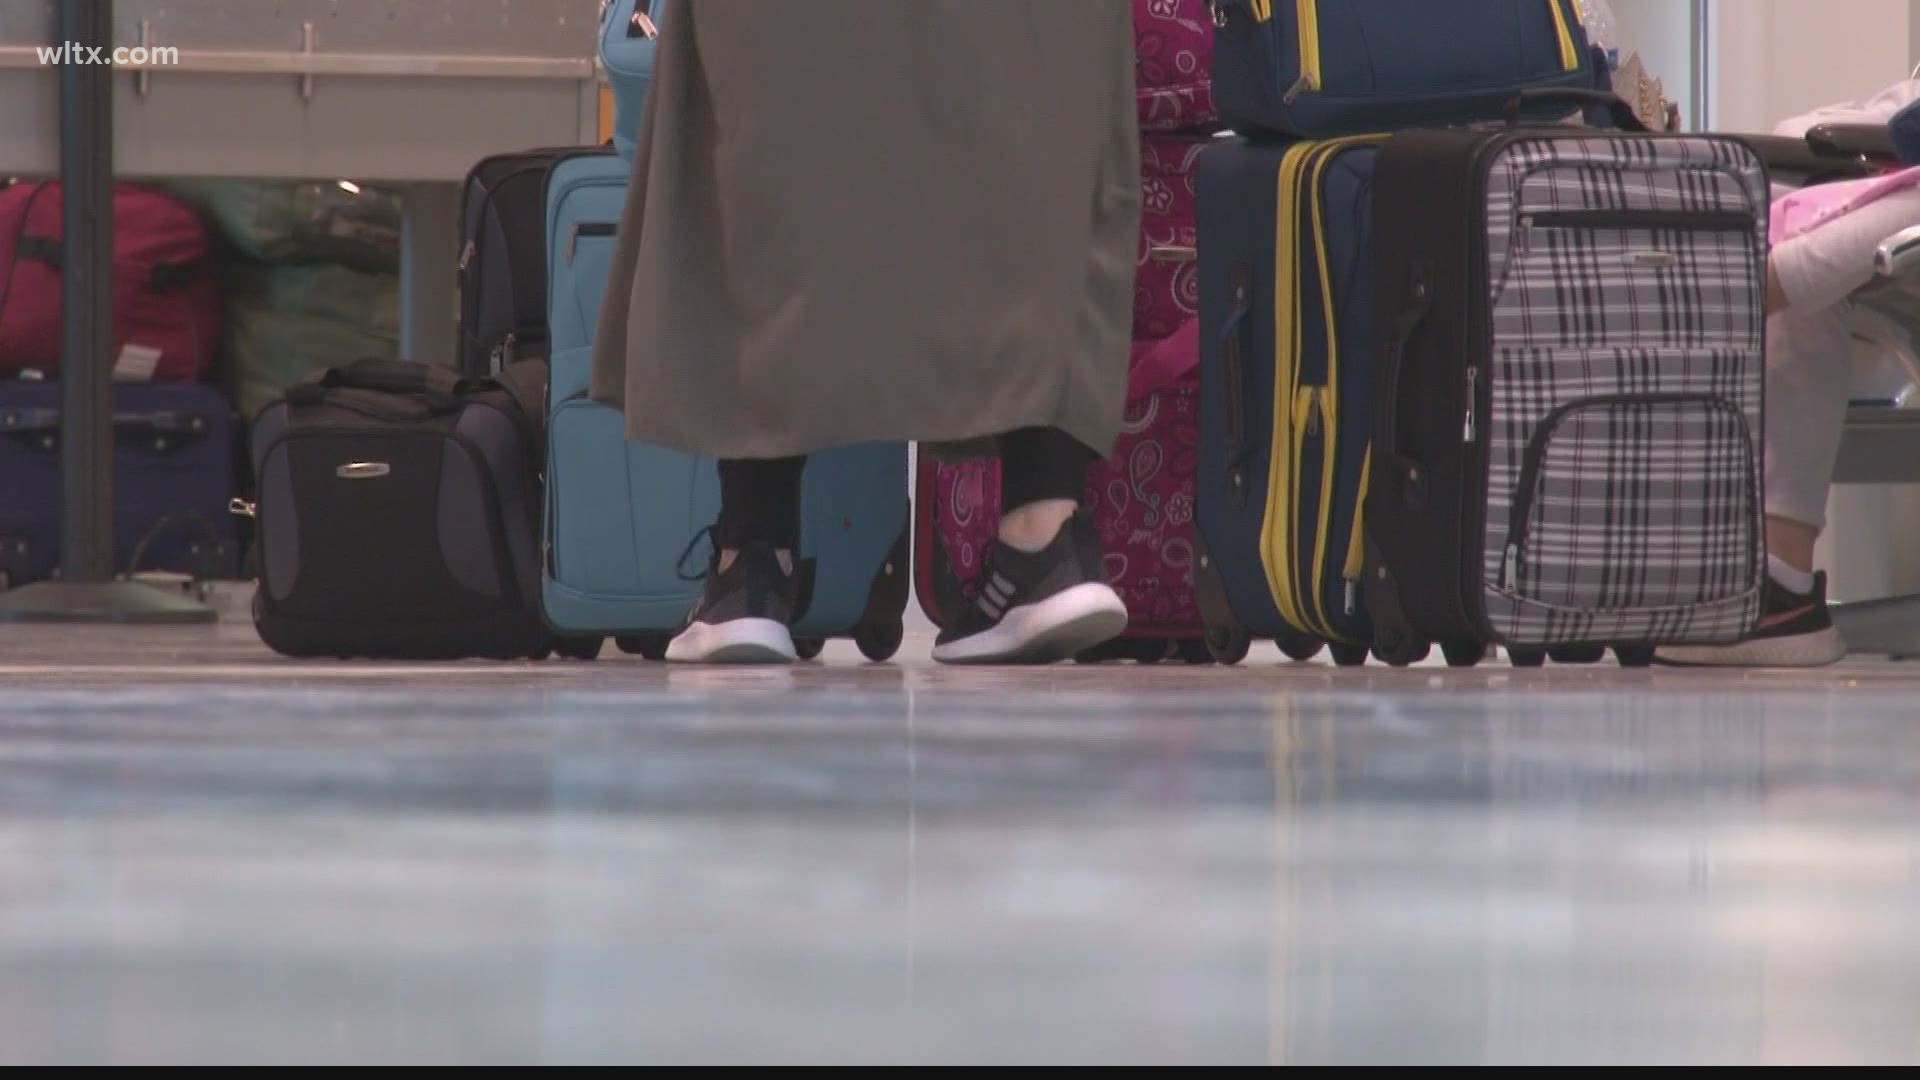 Some travelers say this is the first time they are traveling since the pandemic.